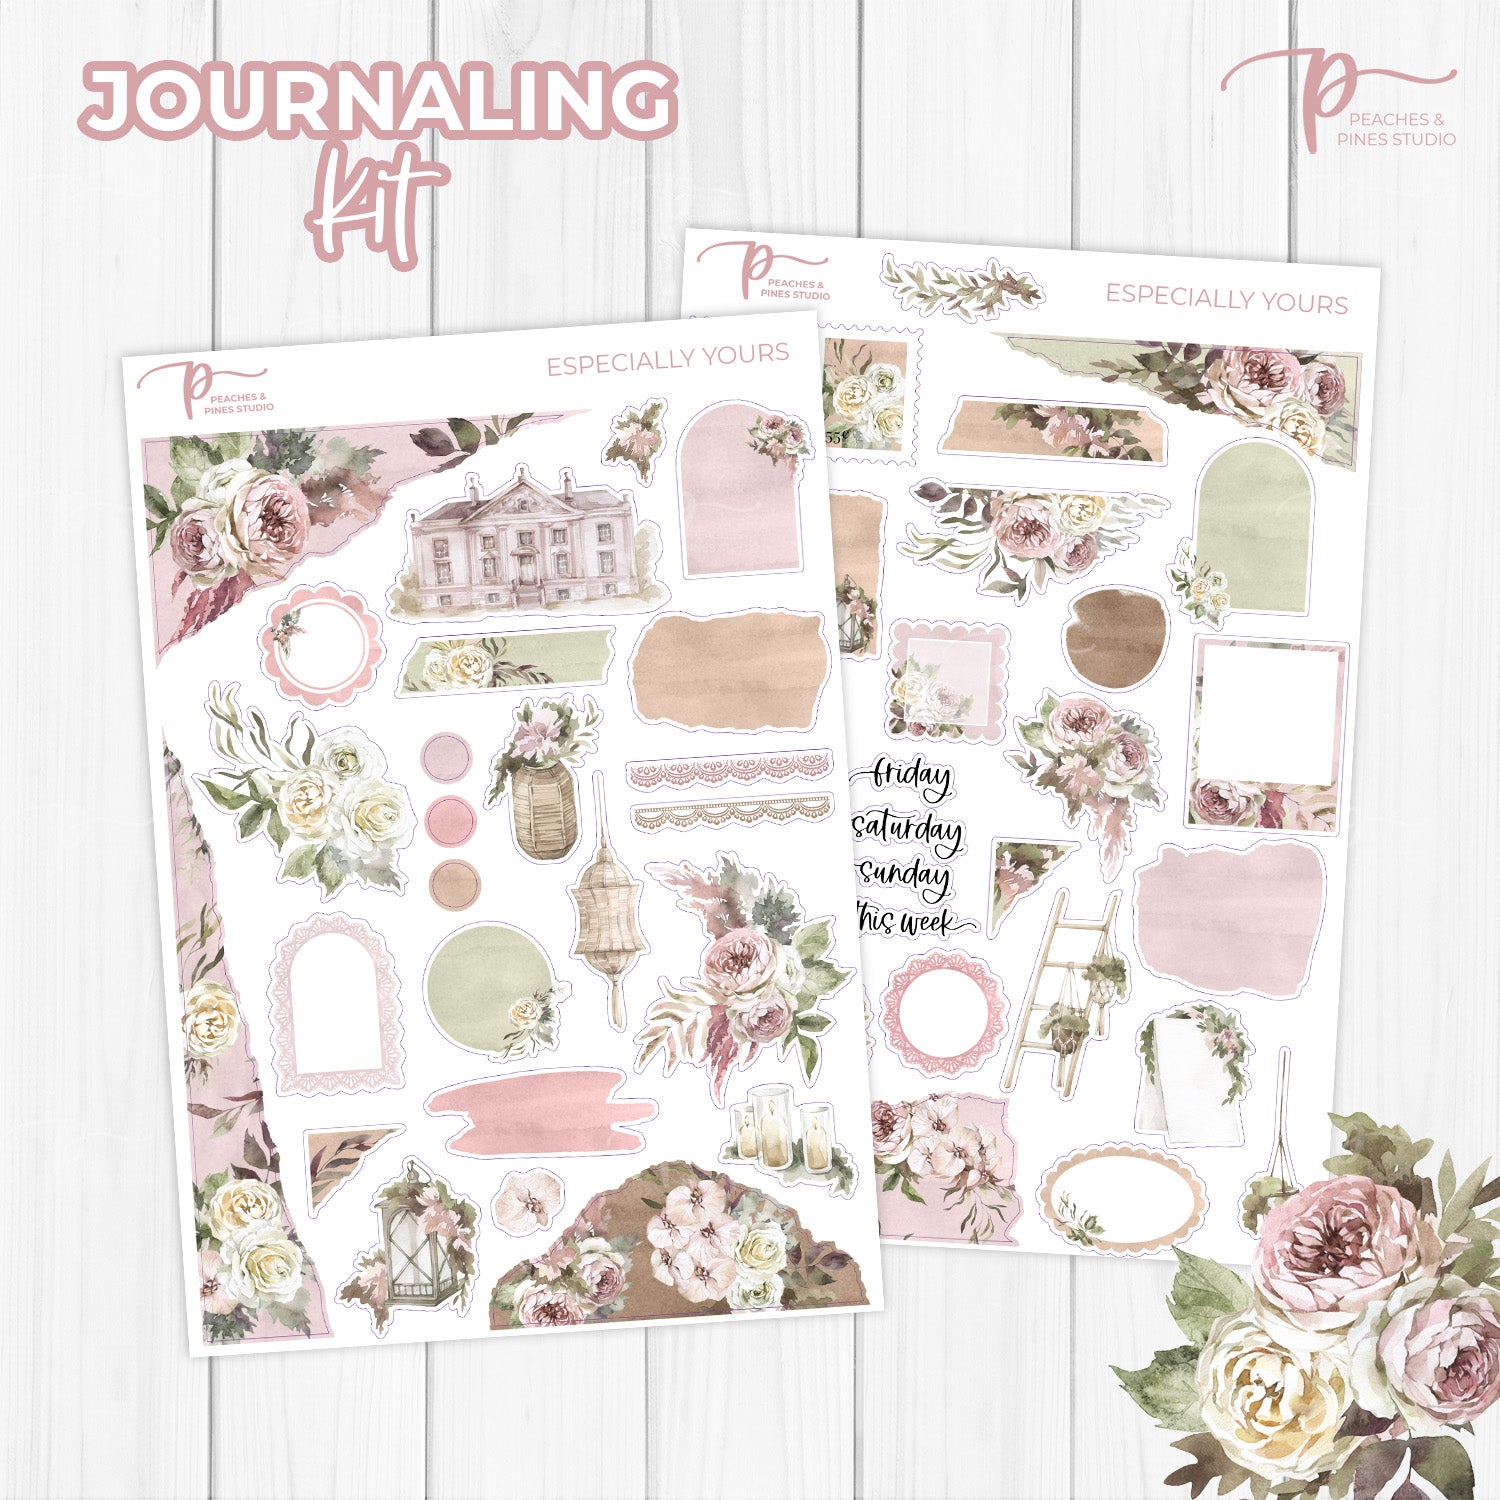 Especially Yours - Journaling Kit